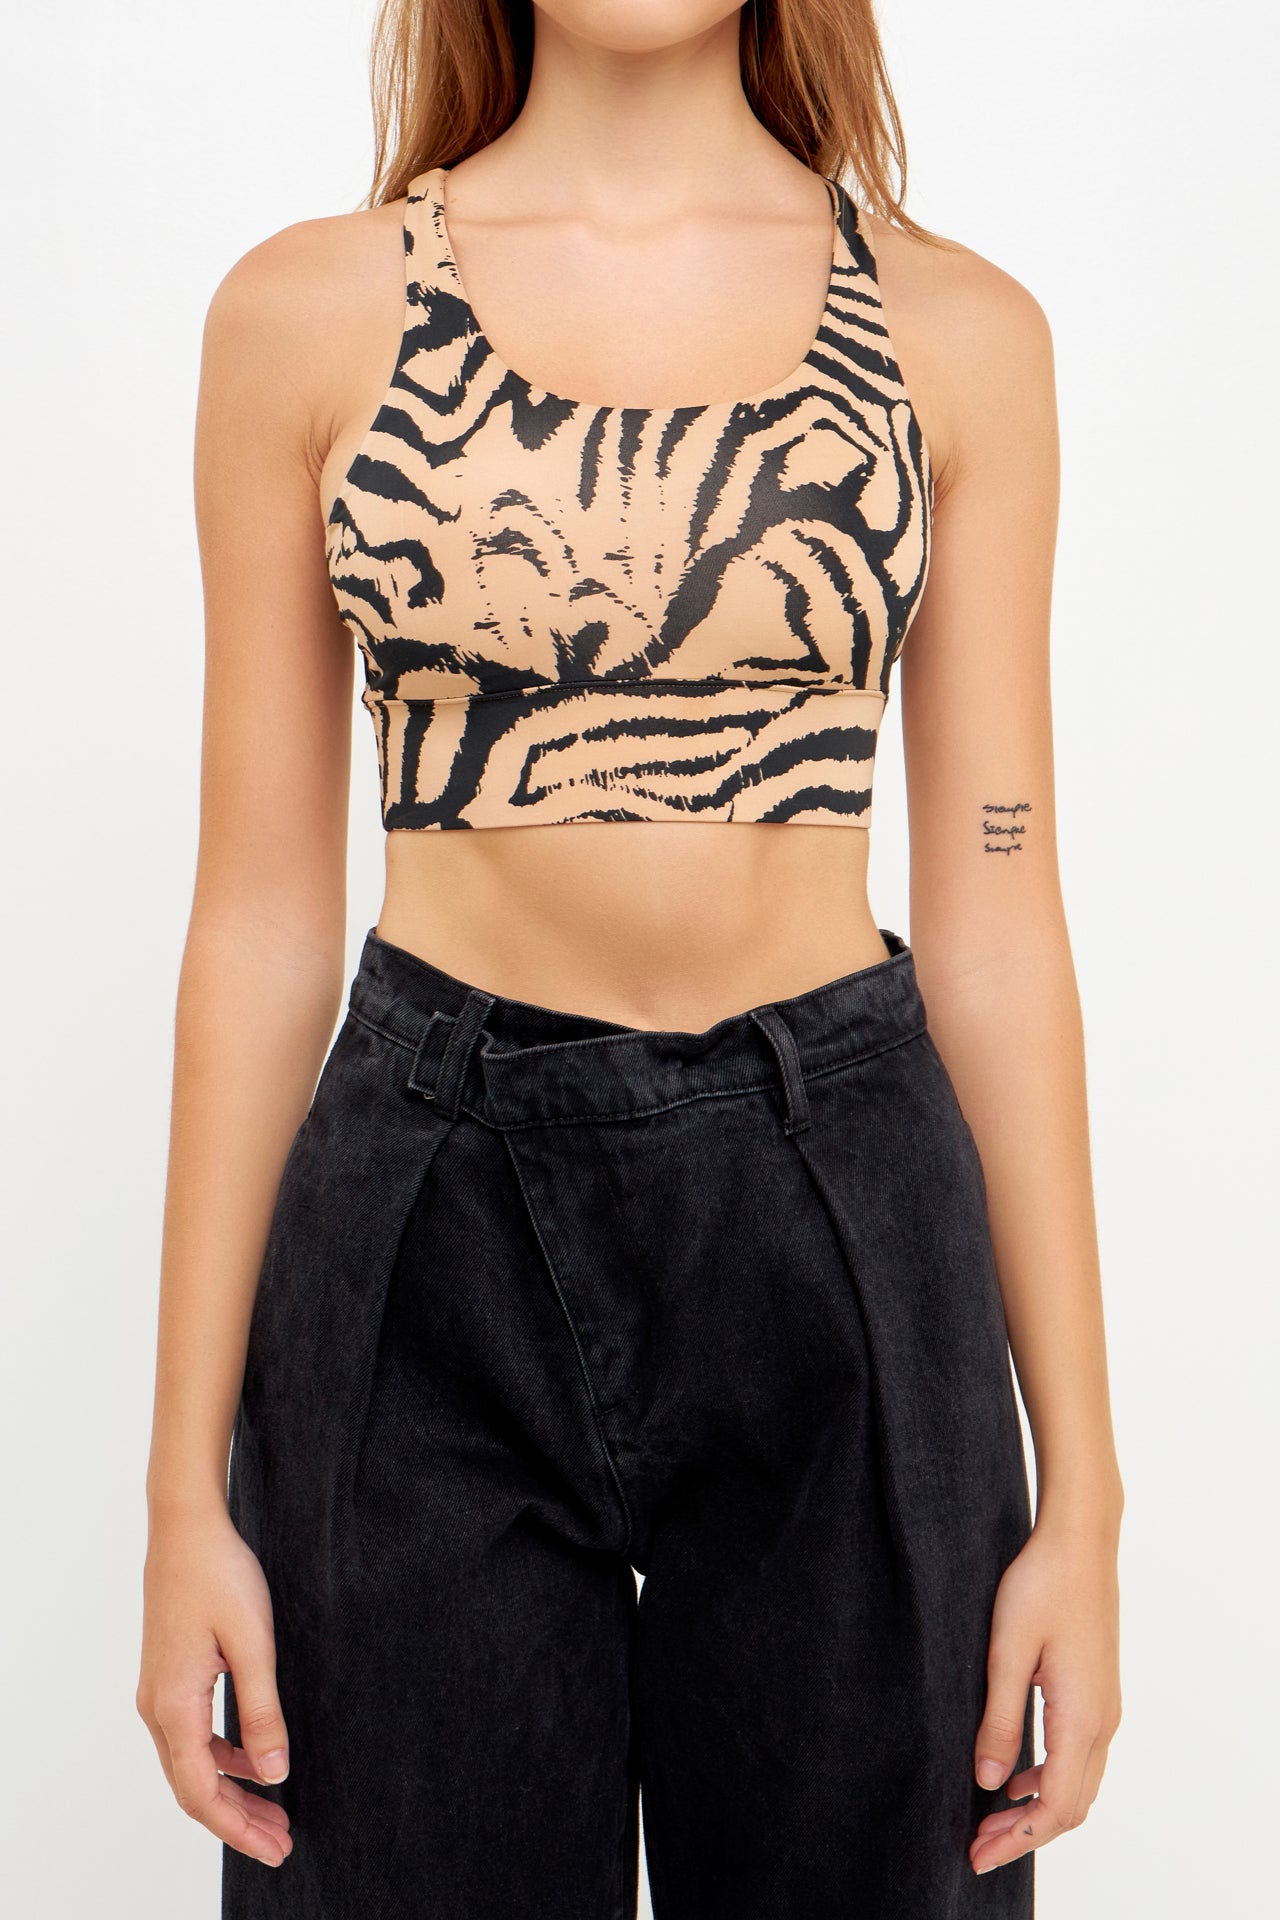 GREY LAB - Animal Print Top - TOPS available at Objectrare